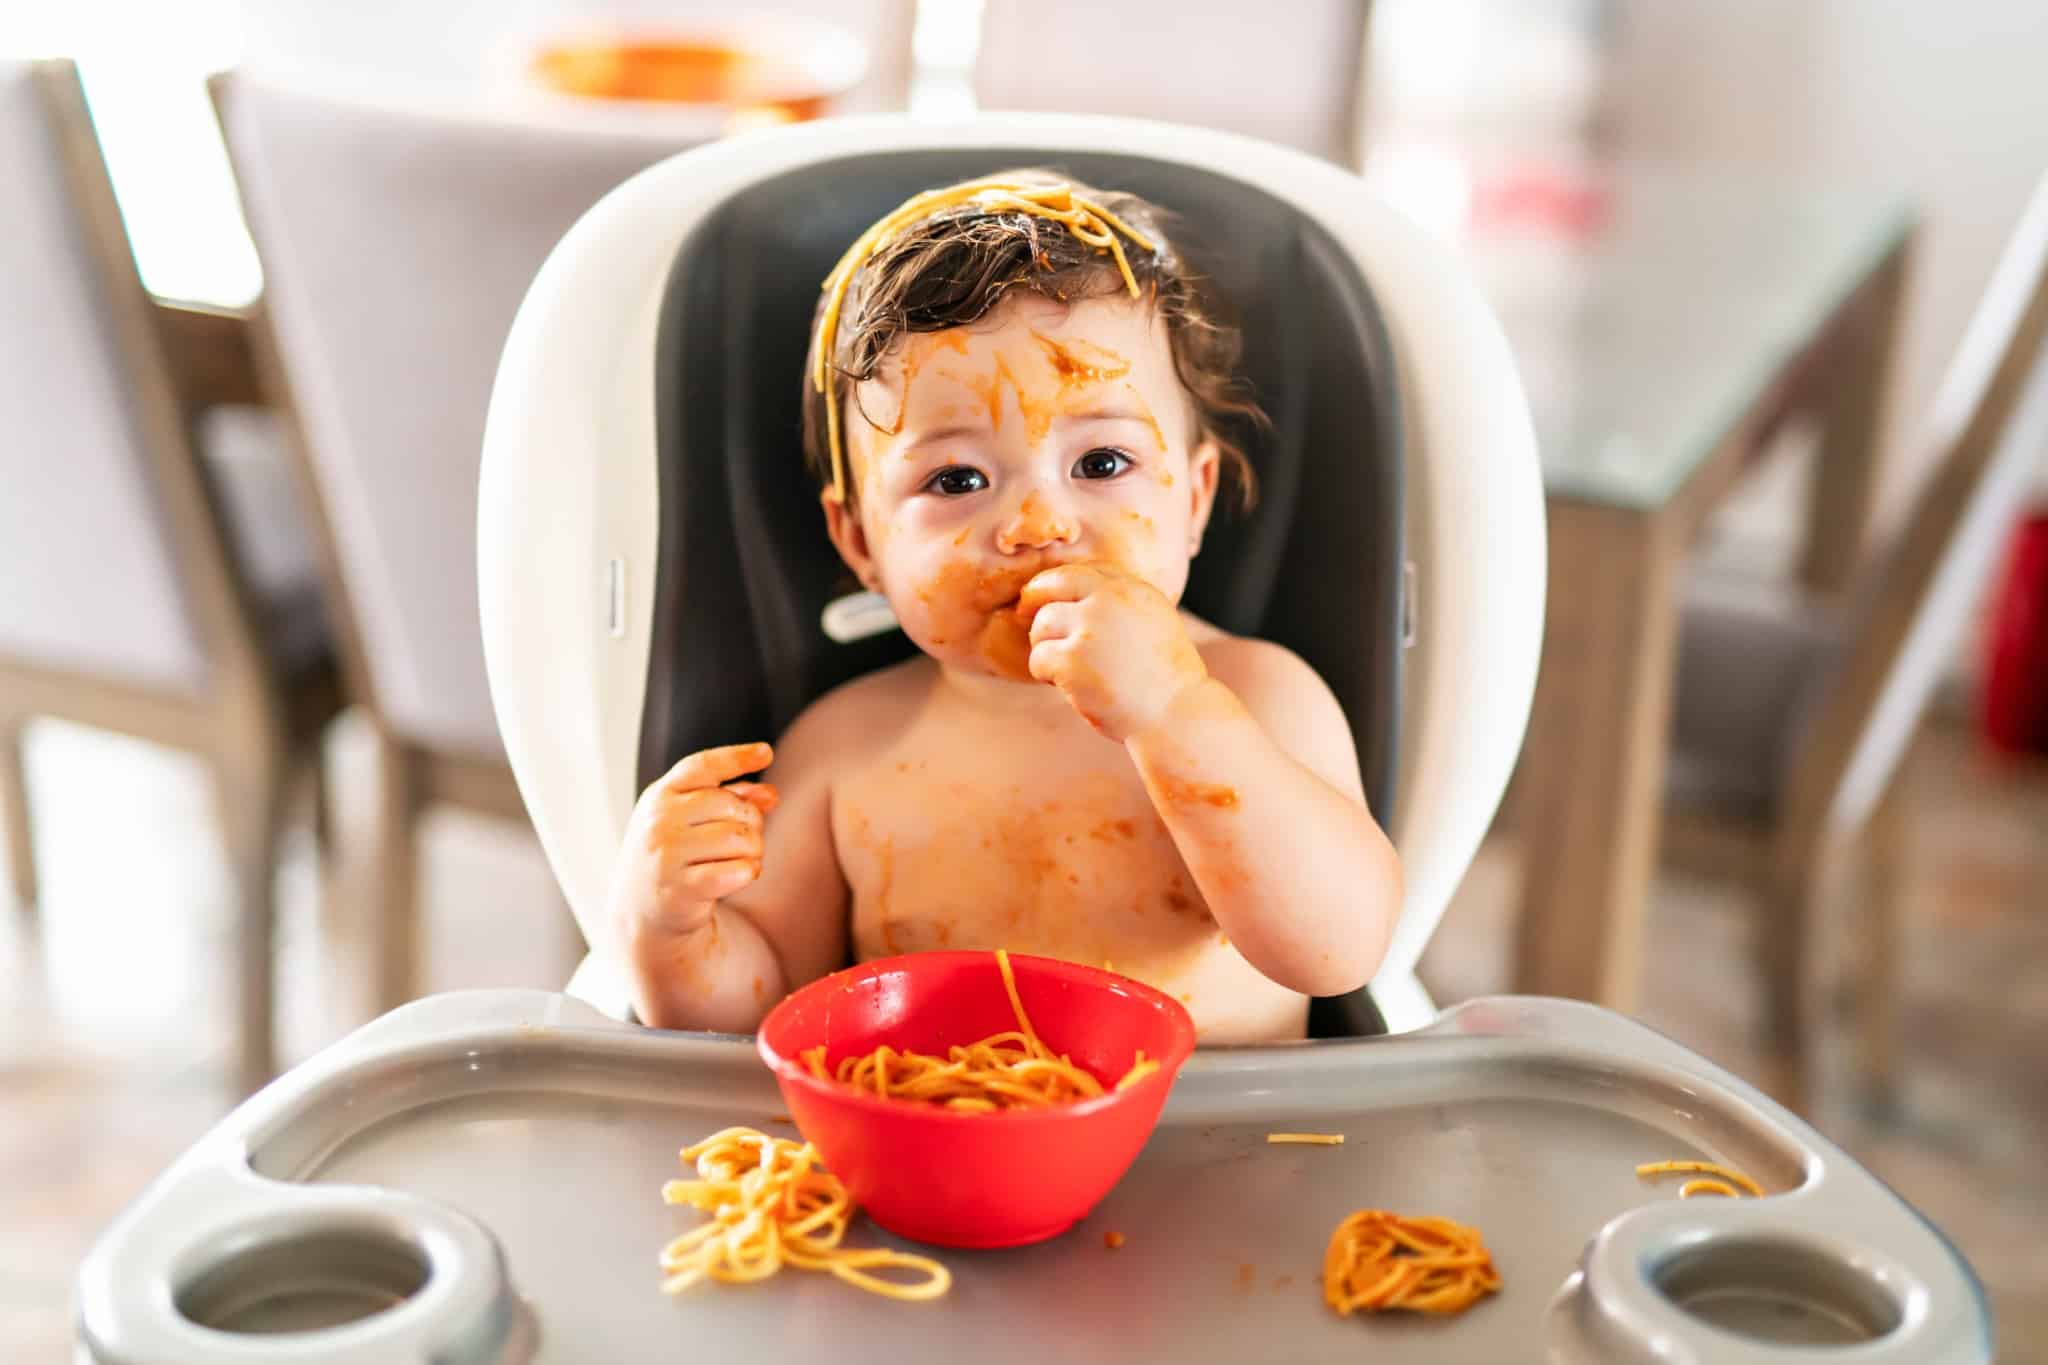 https://www.gentlenursery.com/wp-content/uploads/2020/03/how-to-introduce-solid-foods-to-your-baby.jpg